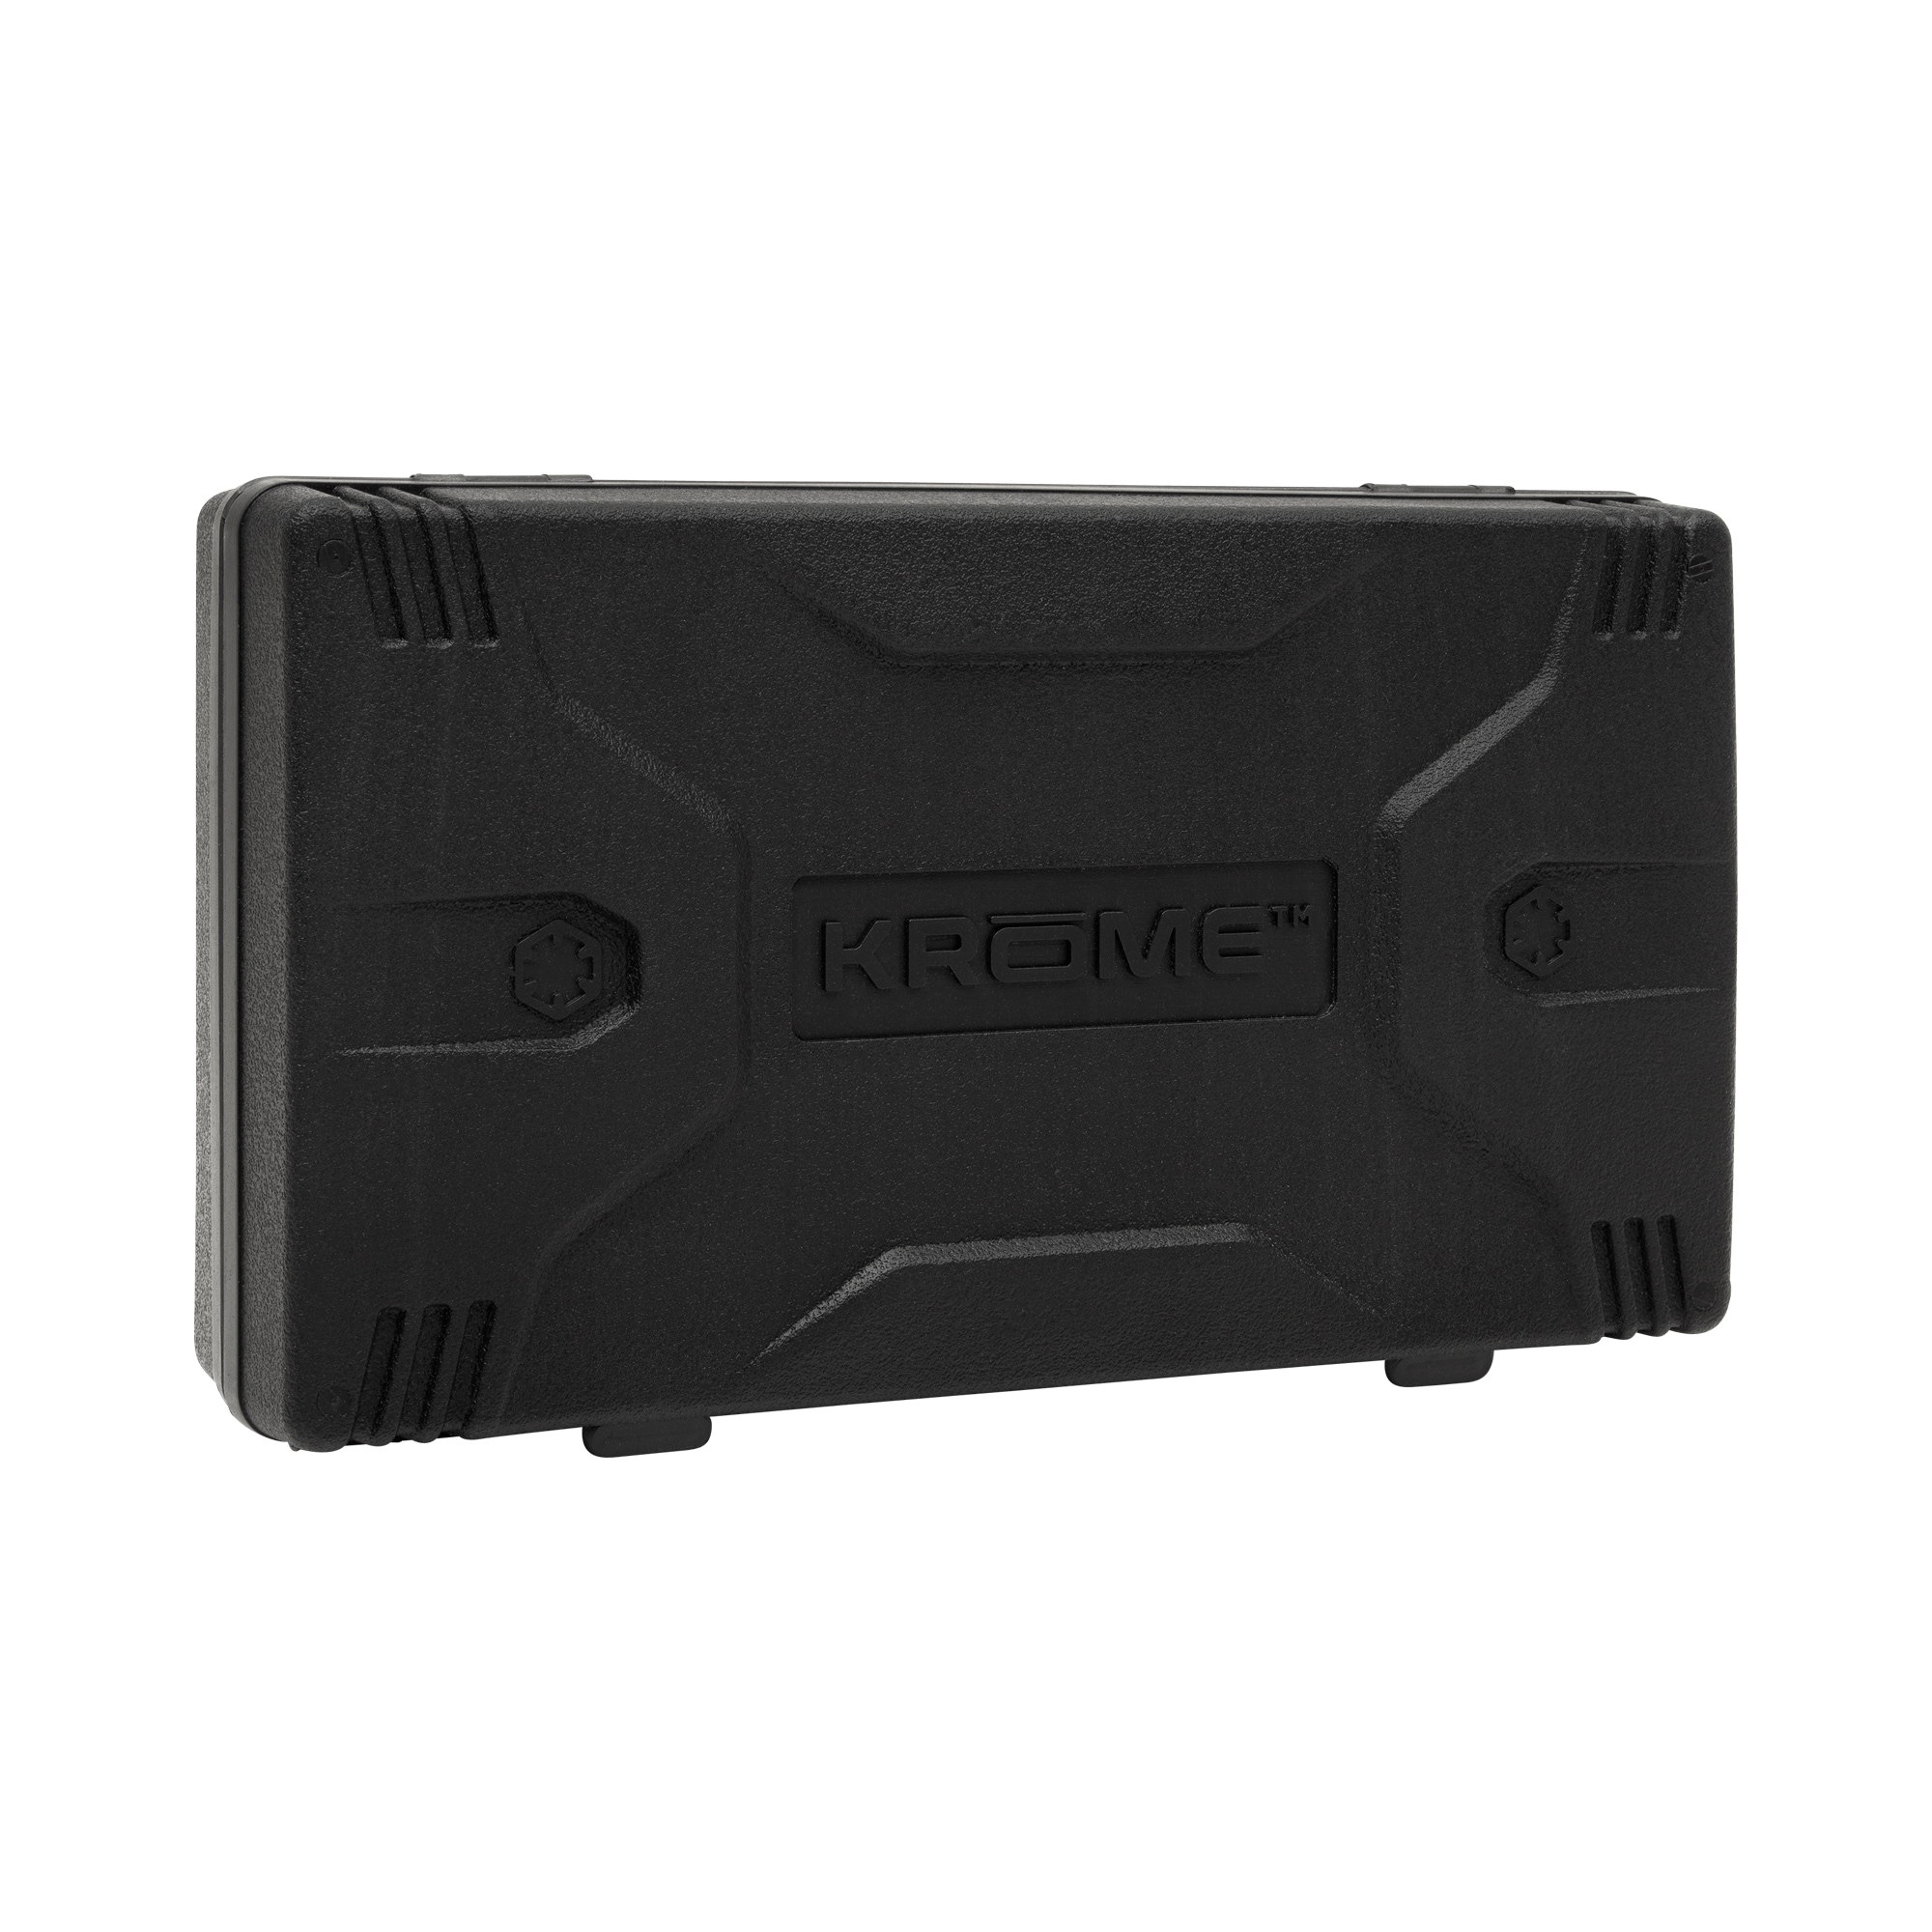 Krome™ Gun Center Toolbox Cleaning Kit, 66-Cleaning Tools, Black/Gray/Red